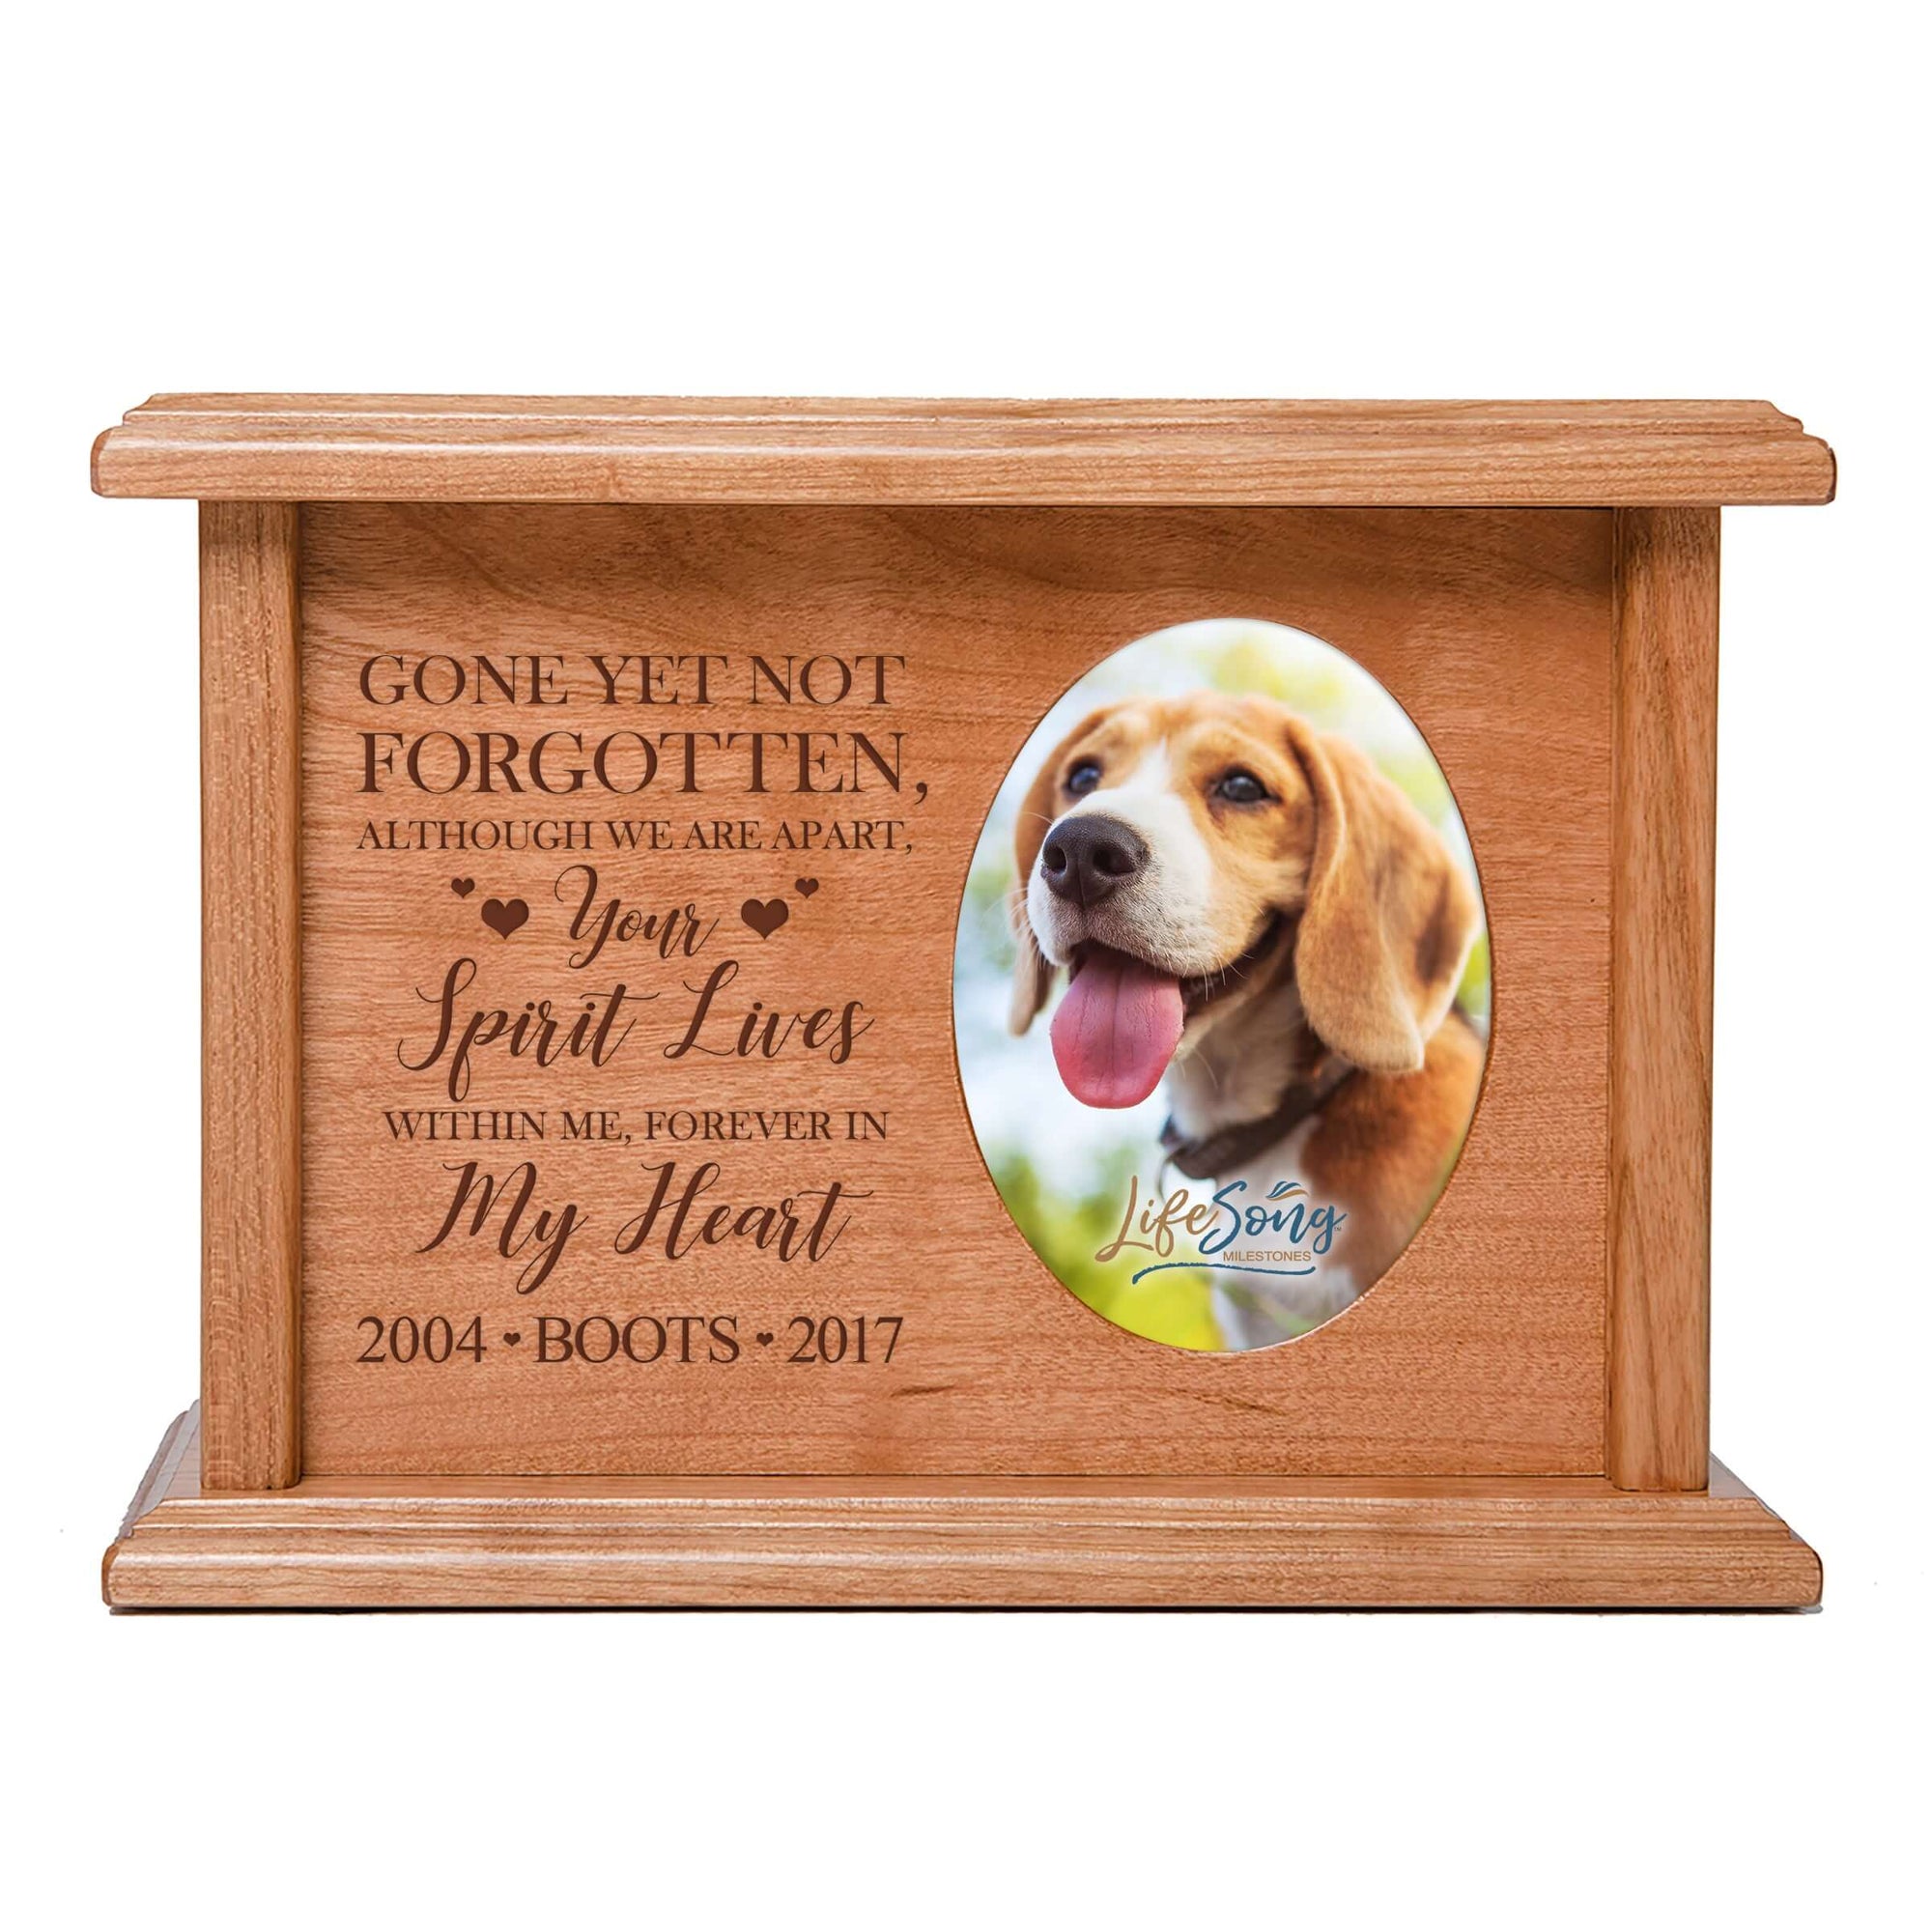 Pet Memorial Picture Cremation Urn Box for Dog or Cat - Gone Yet Not Forgotten